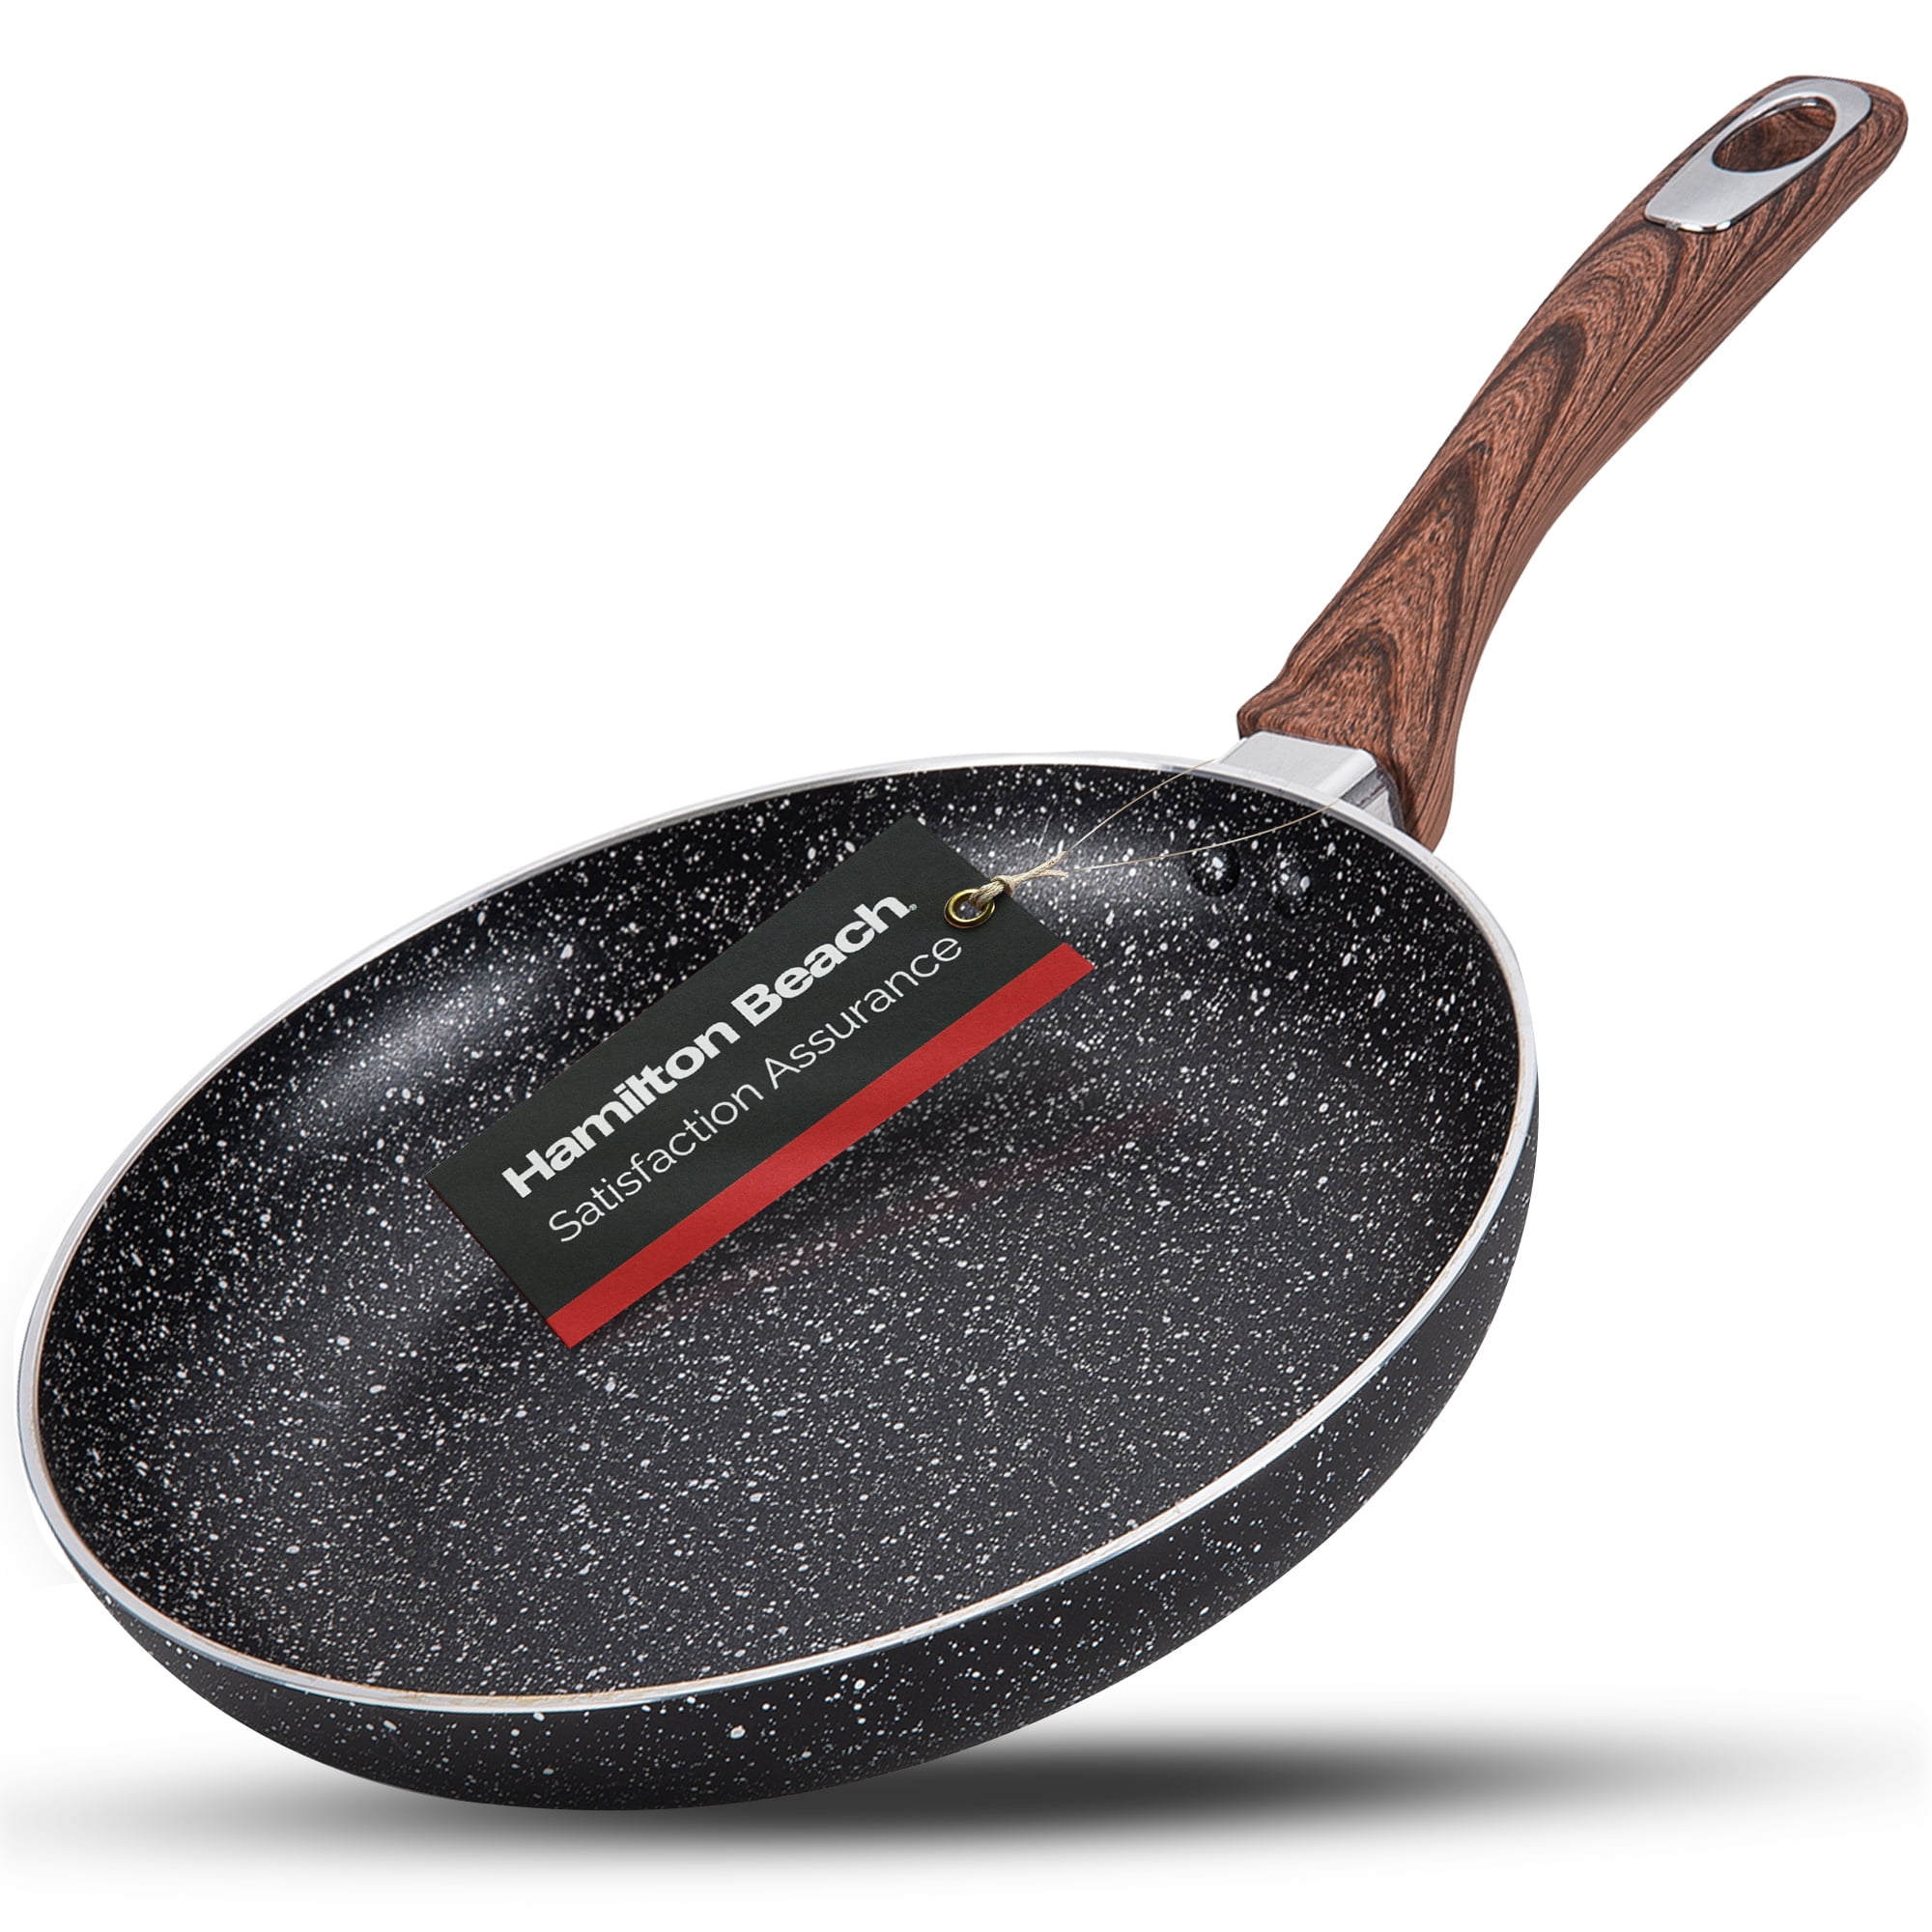 Hamilton Beach Saute Pan Aluminum 11-Inch Nonstick Marble Coating, Wood  Like Soft Touch Handle, Multipurpose Fry Pans With Glass Lid, Chef Pan  Stone Cookware Cooking Pan, Induction Bottom, PFOA Free